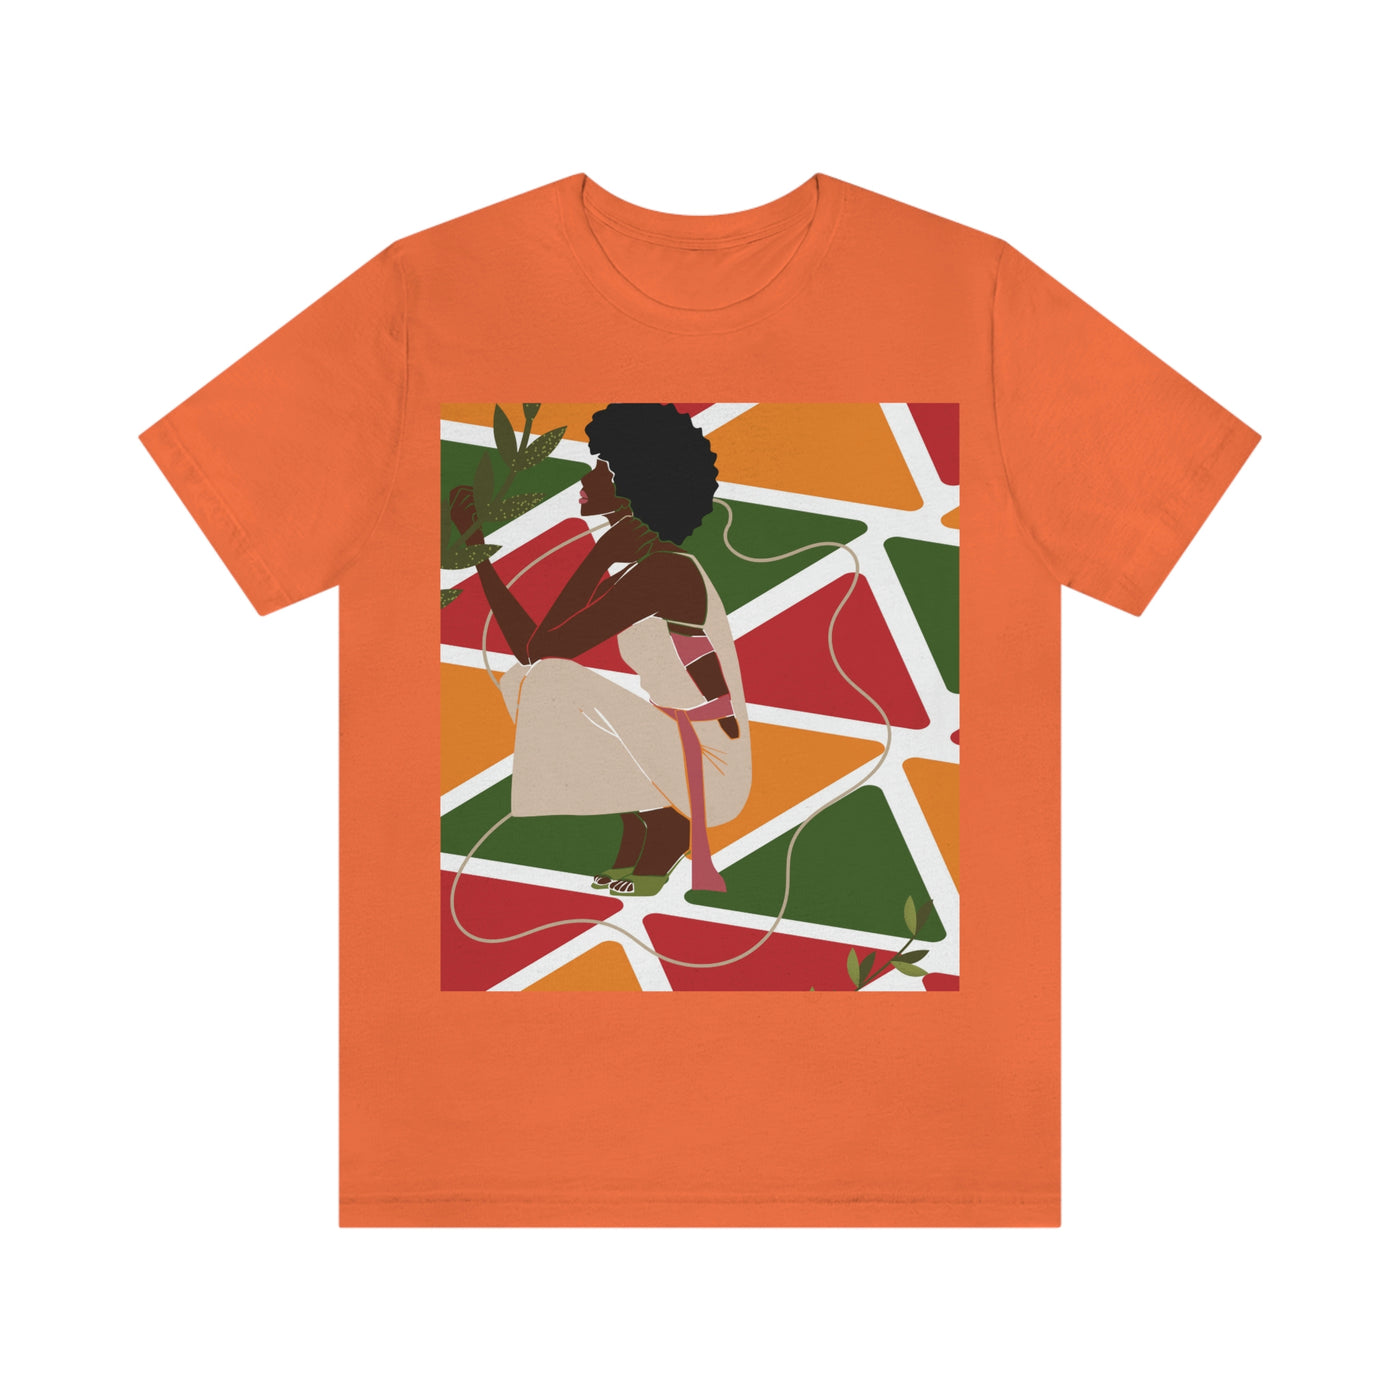 Afro Woman African Print Cotton Unisex Tee